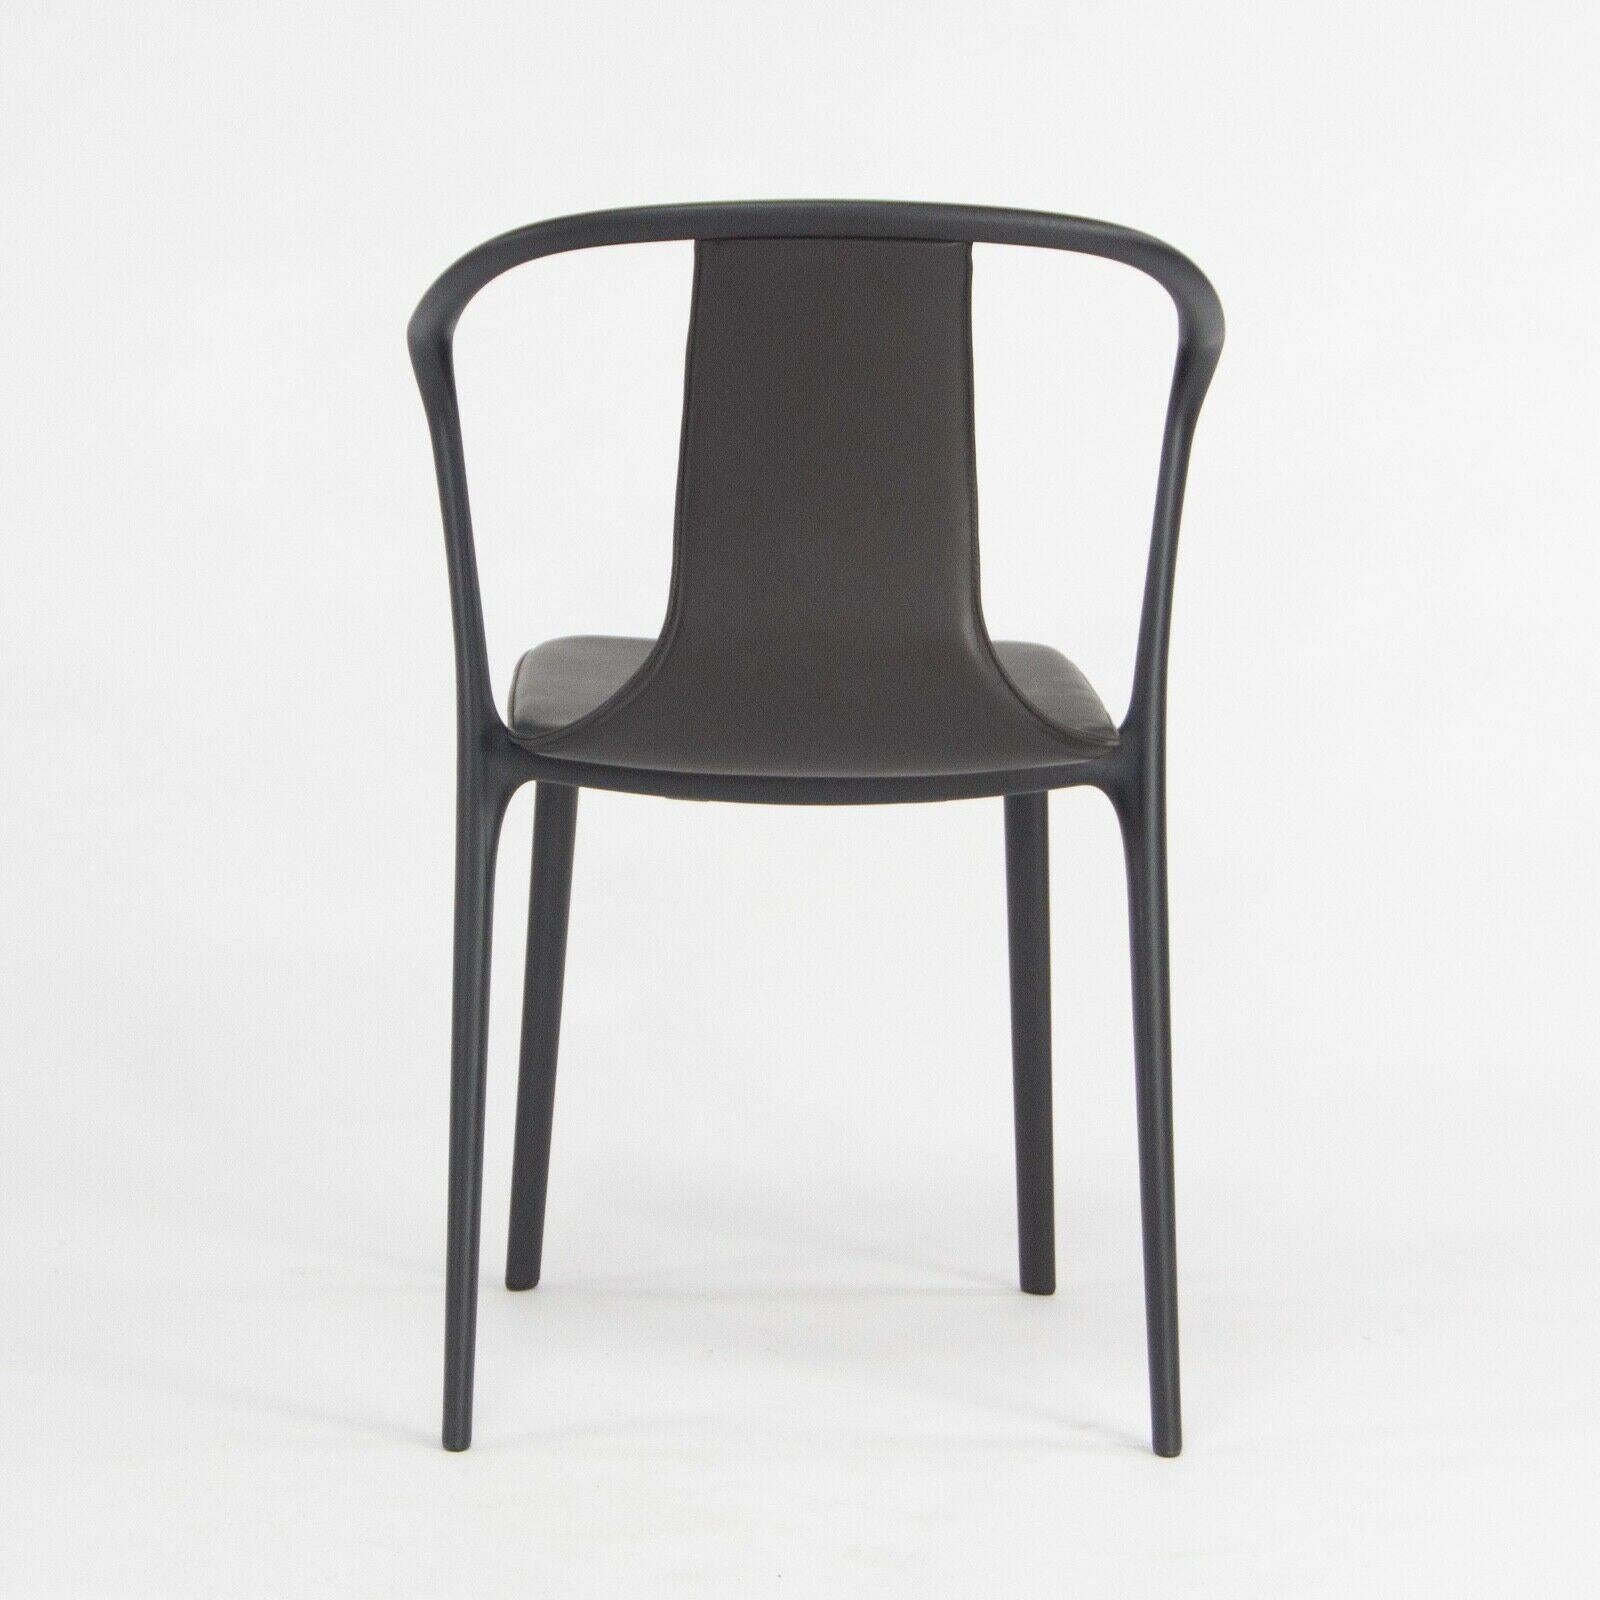 Contemporary C. 2019 Vitra Belleville Armchair in Brown Leather by Ronan & Erwan Bouroullec For Sale